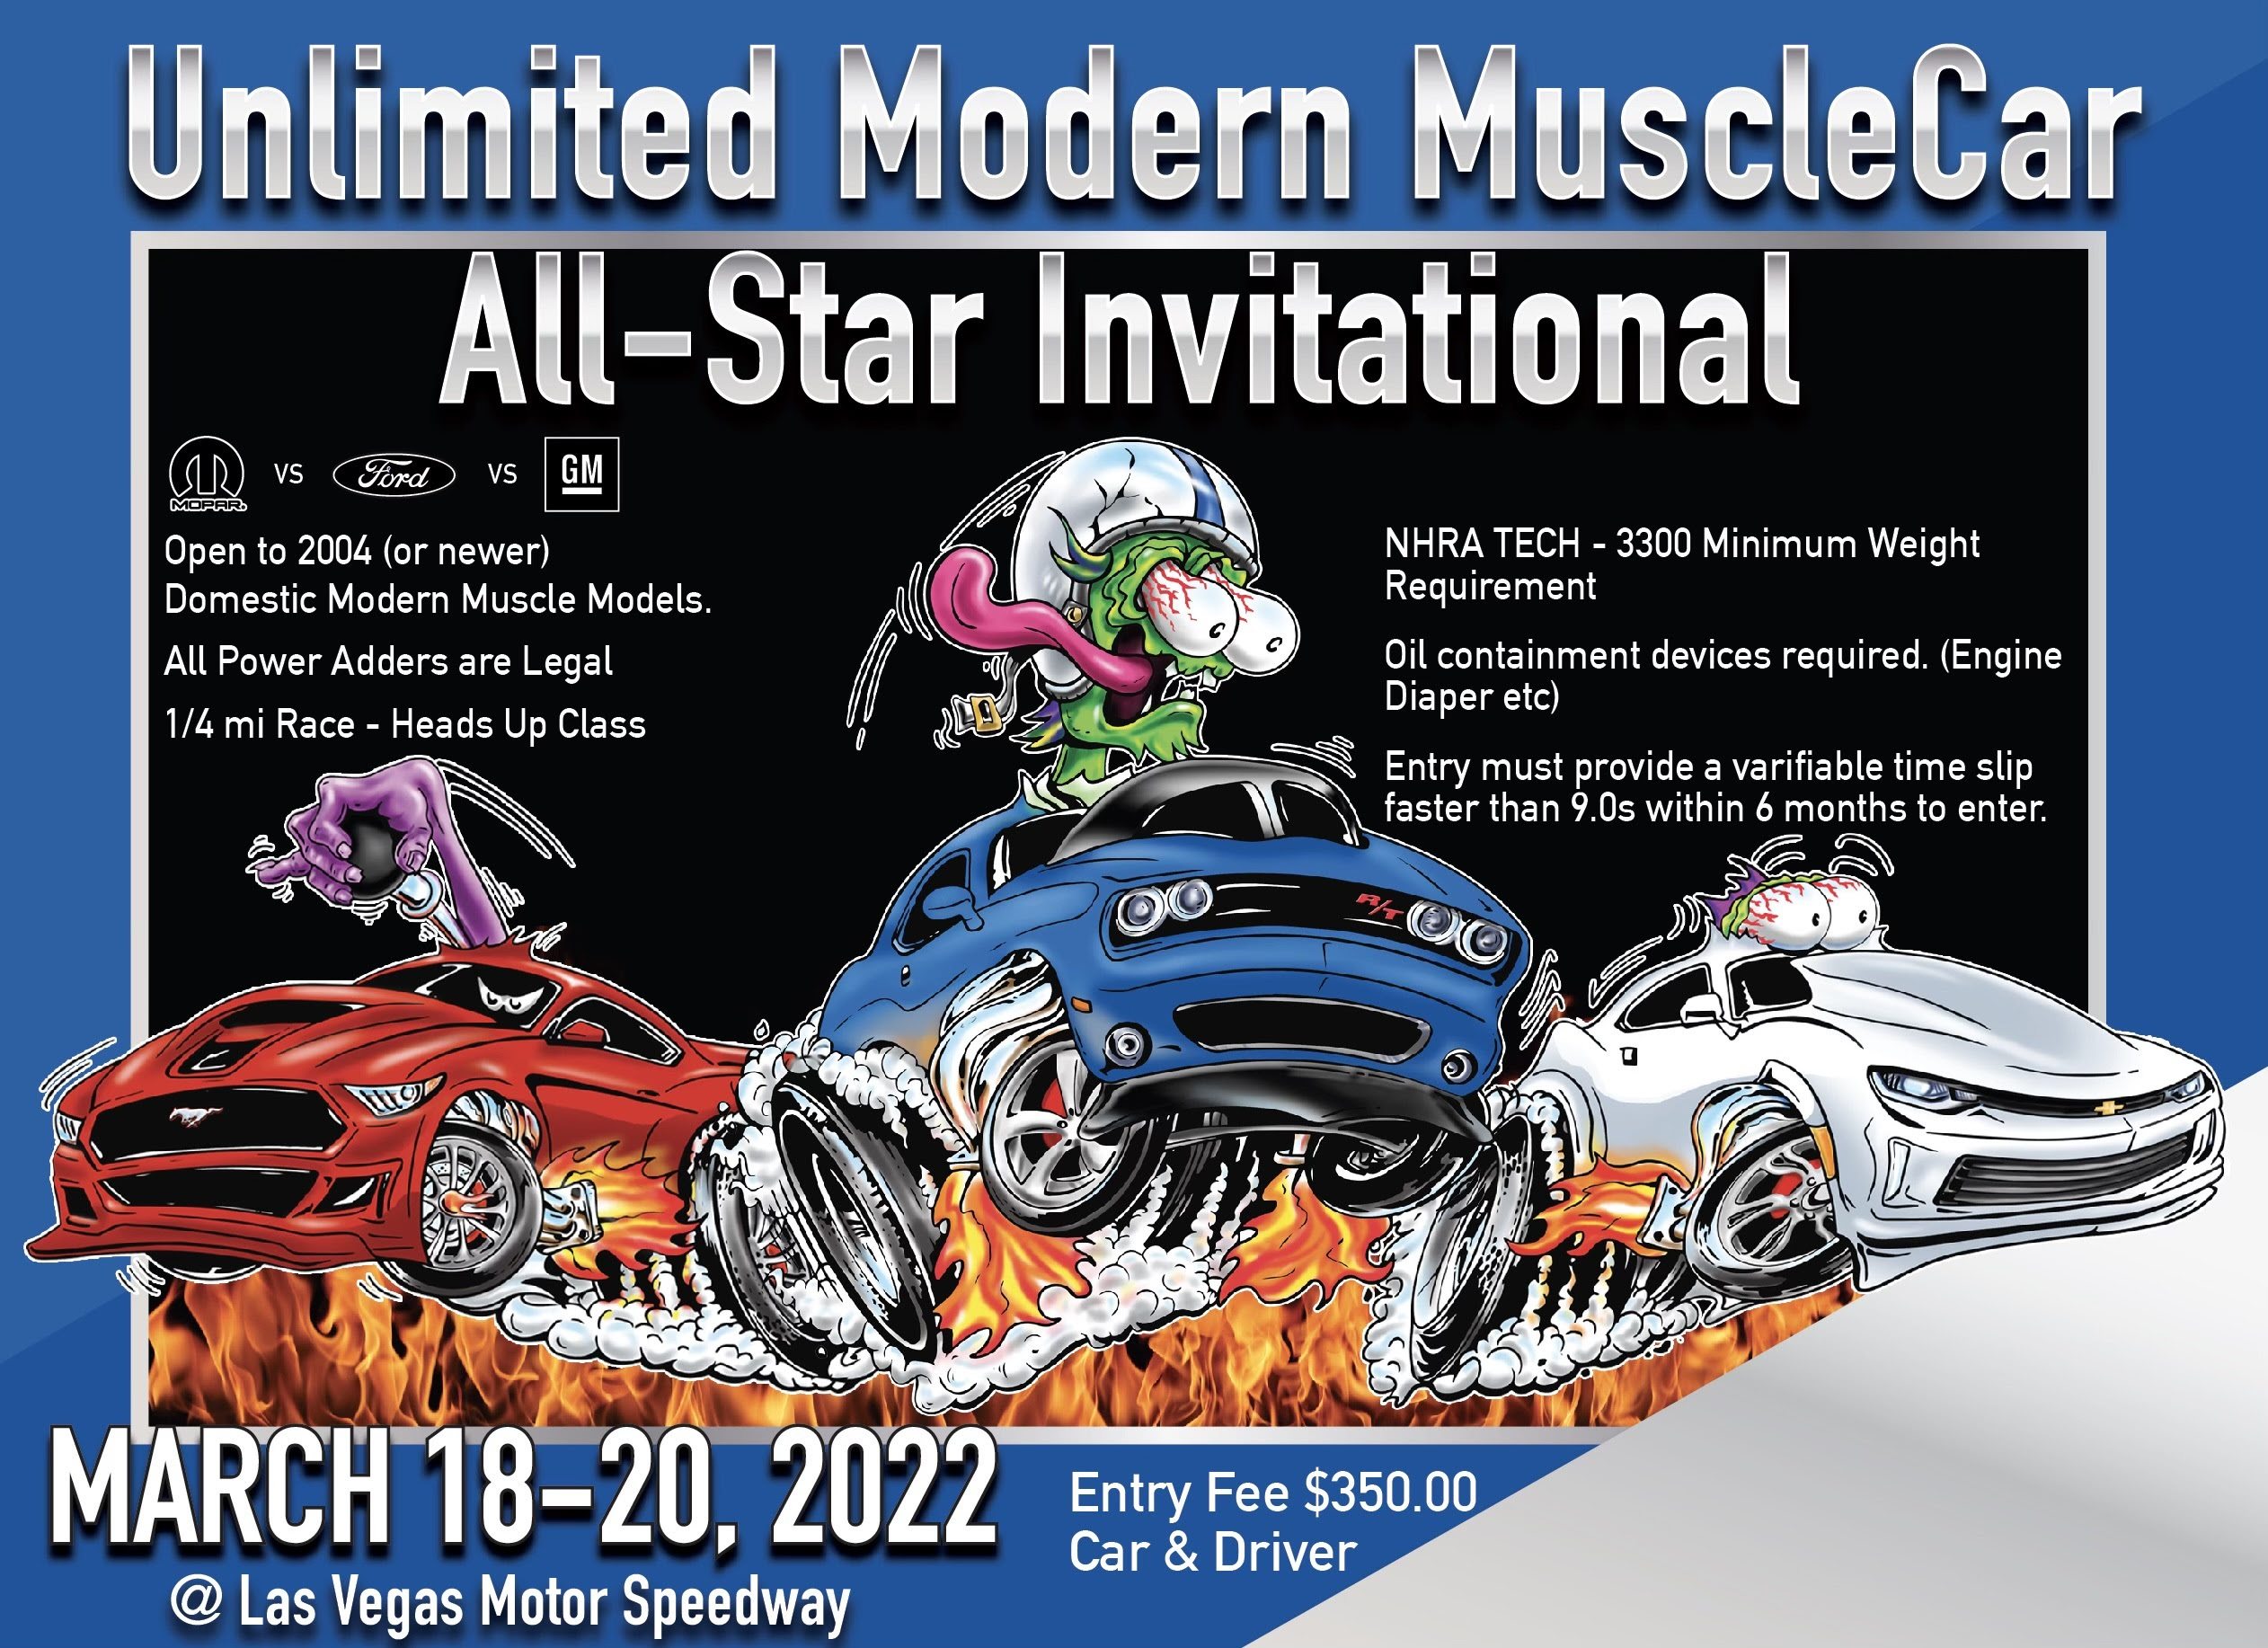 Modern Muscle Car AllStar Invitational Comes to Las Vegas March 1820